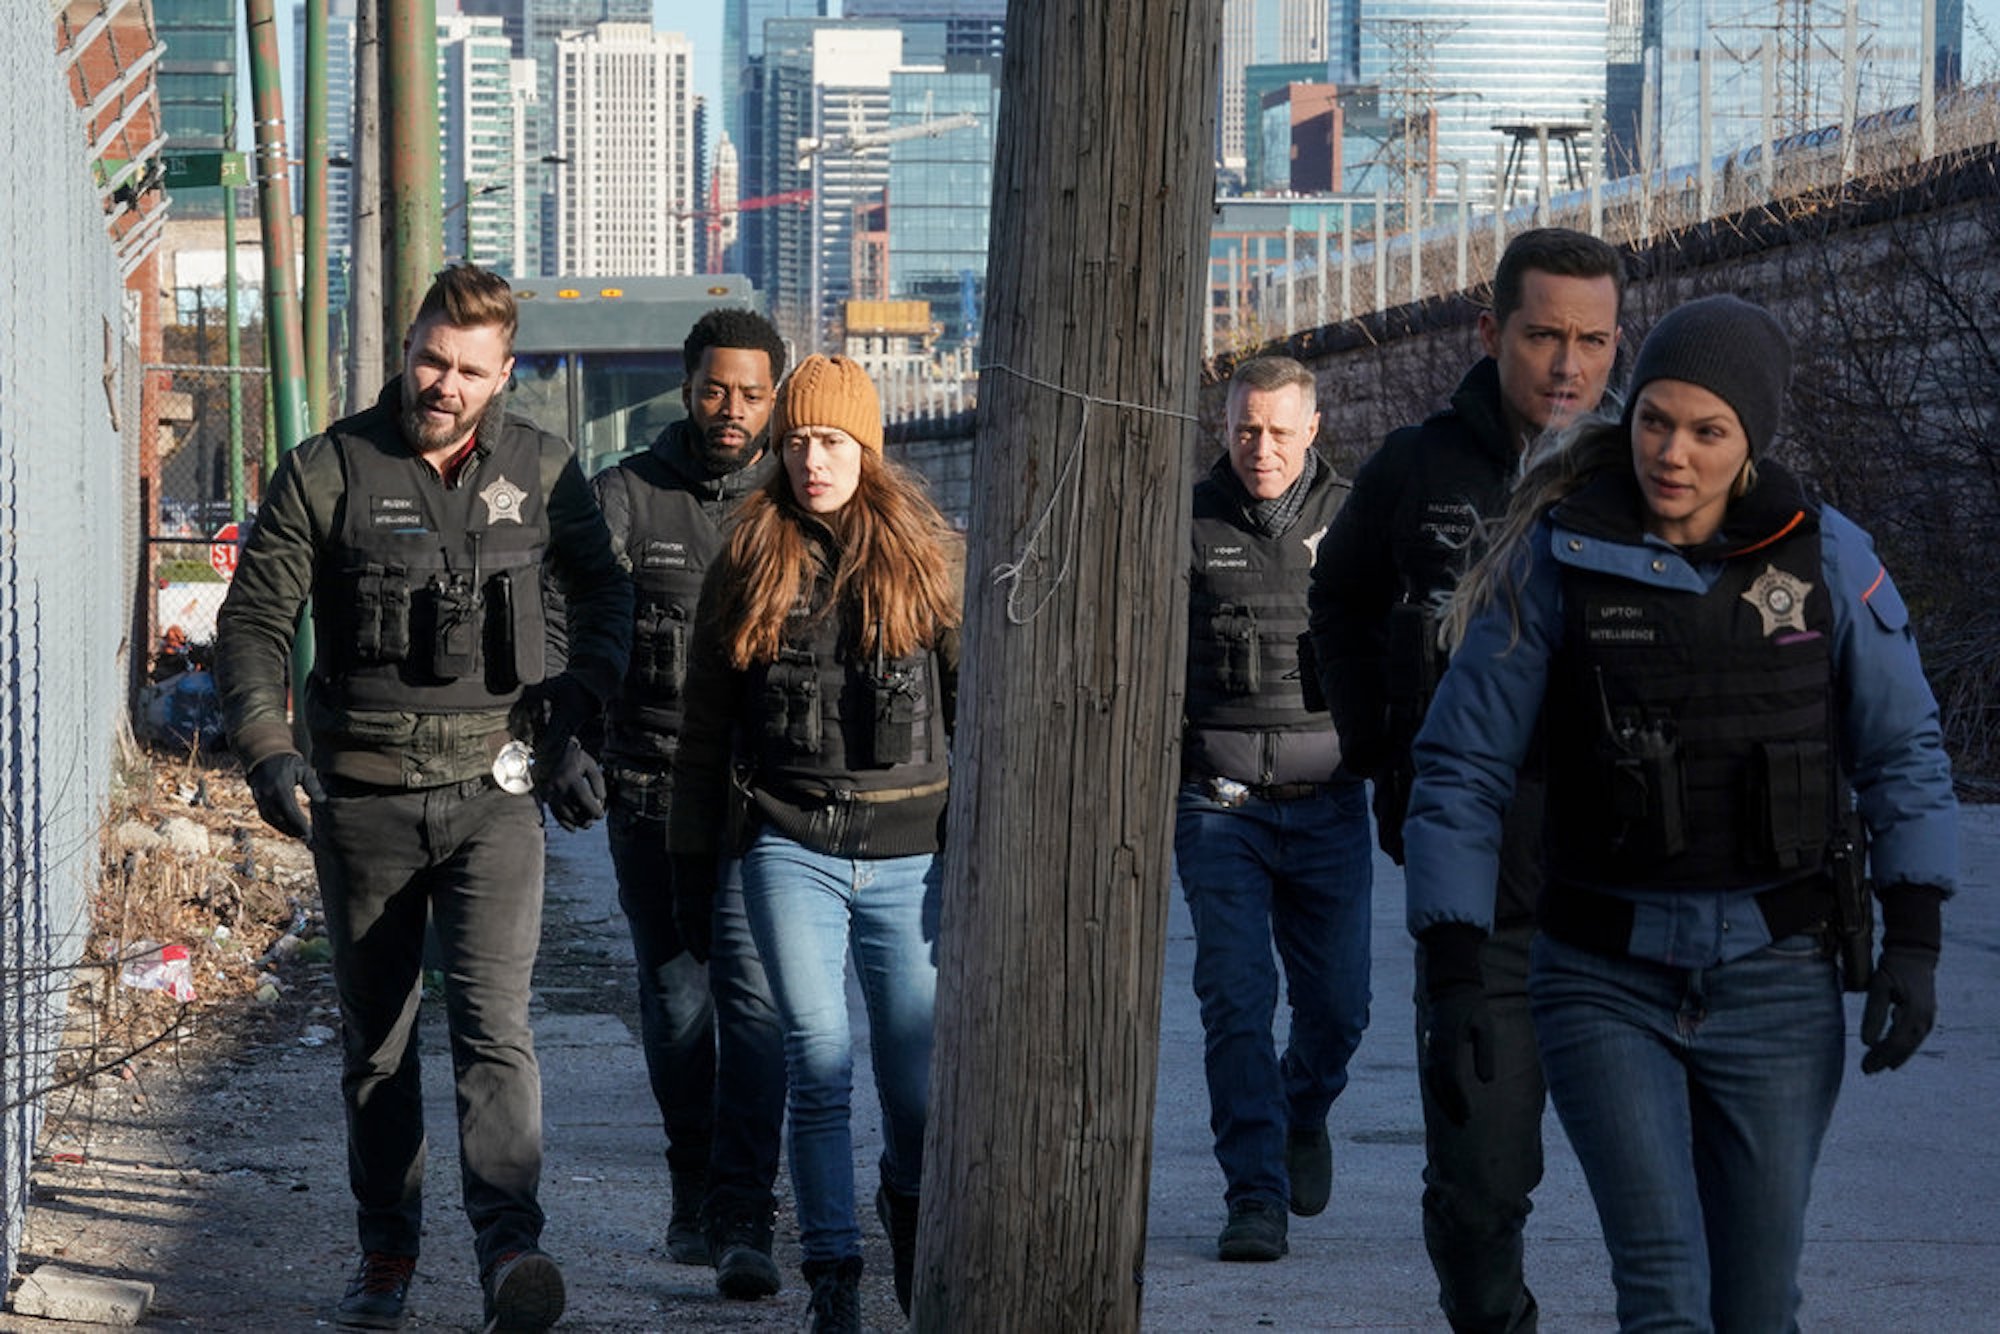 Adam Ruzek, Kevin Atwater, Kim Burgess, Hank Voight, Jay Halstead, and Hailey Upton walking together outside in 'Chicago P.D.' Season 9